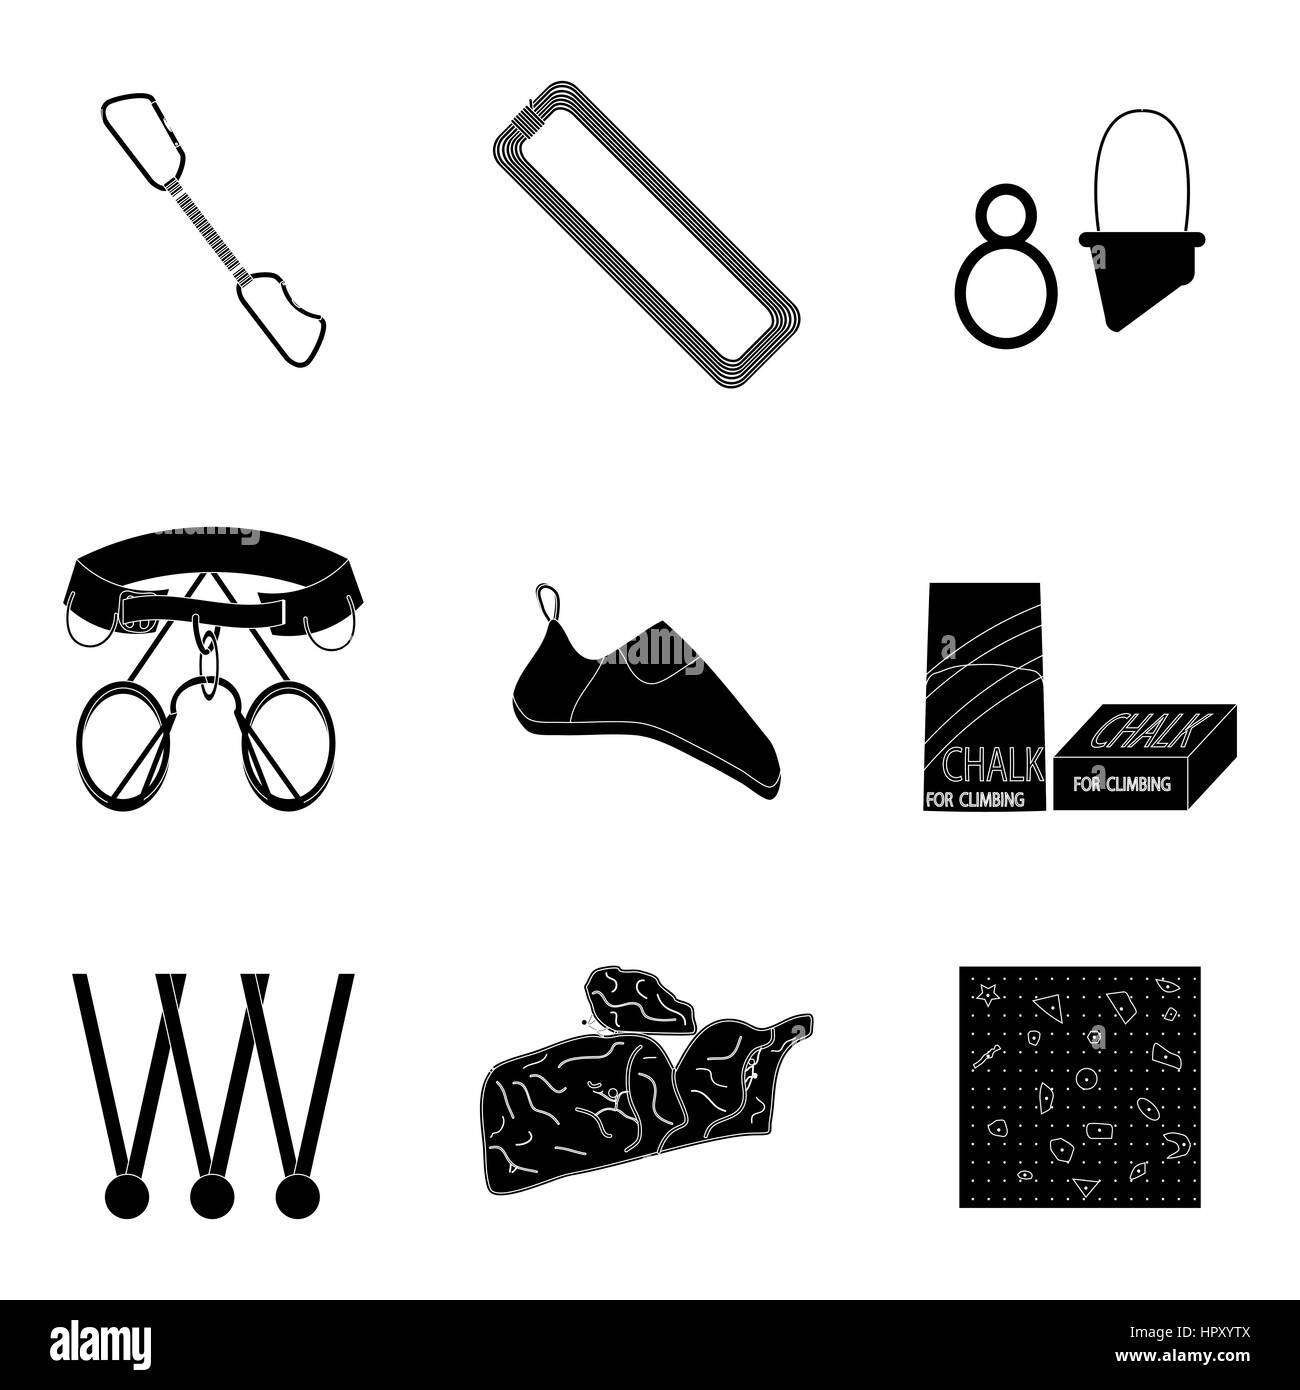 Sport climbing vector black silhouette. Quickdraw and rope icon illustration Stock Photo